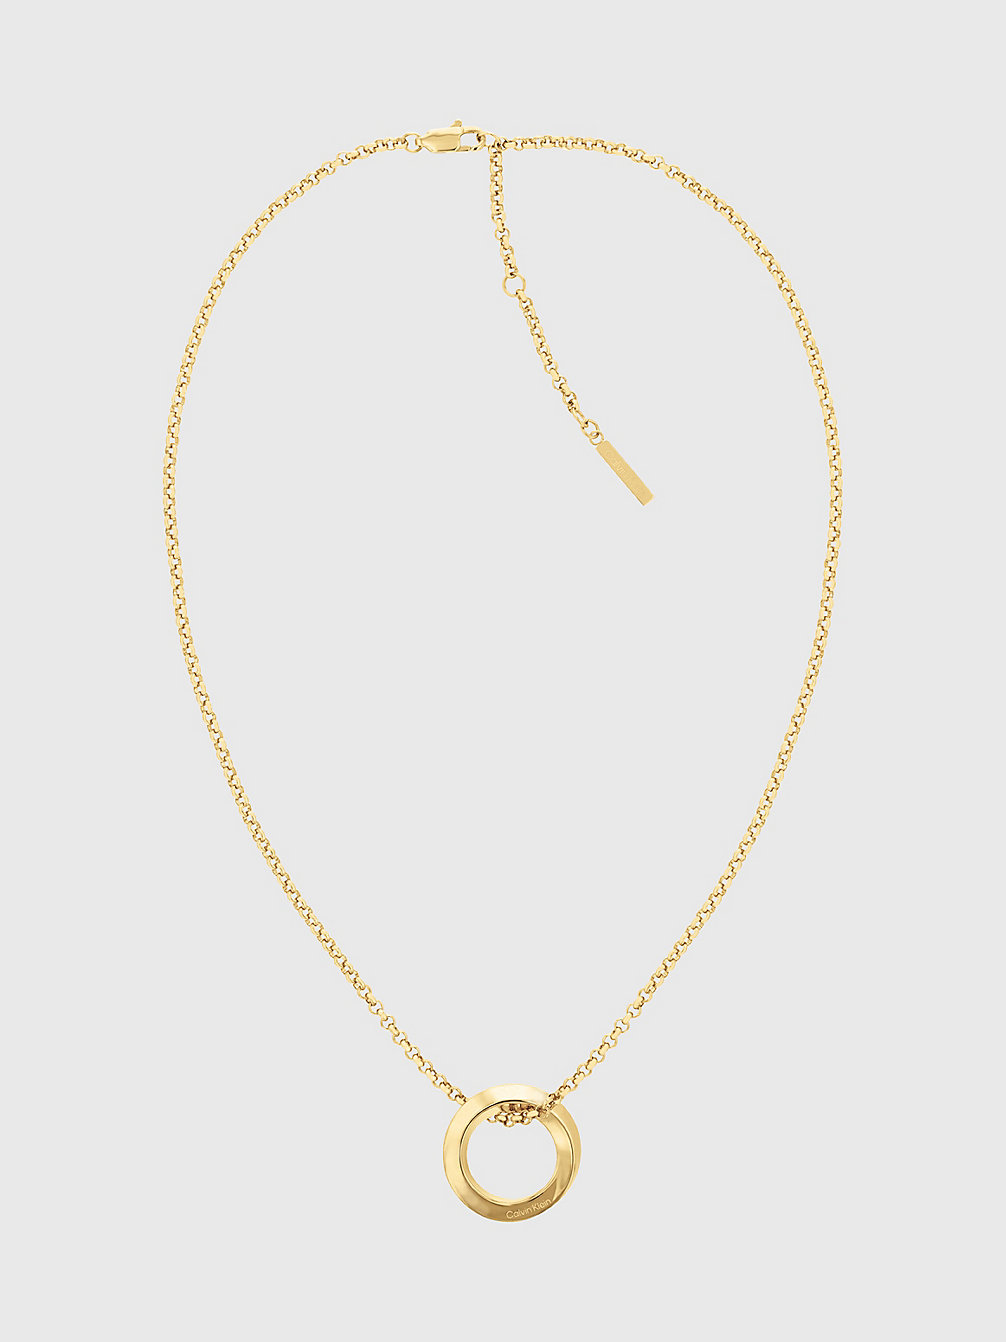 GOLD Necklace - Twisted Ring undefined women Calvin Klein